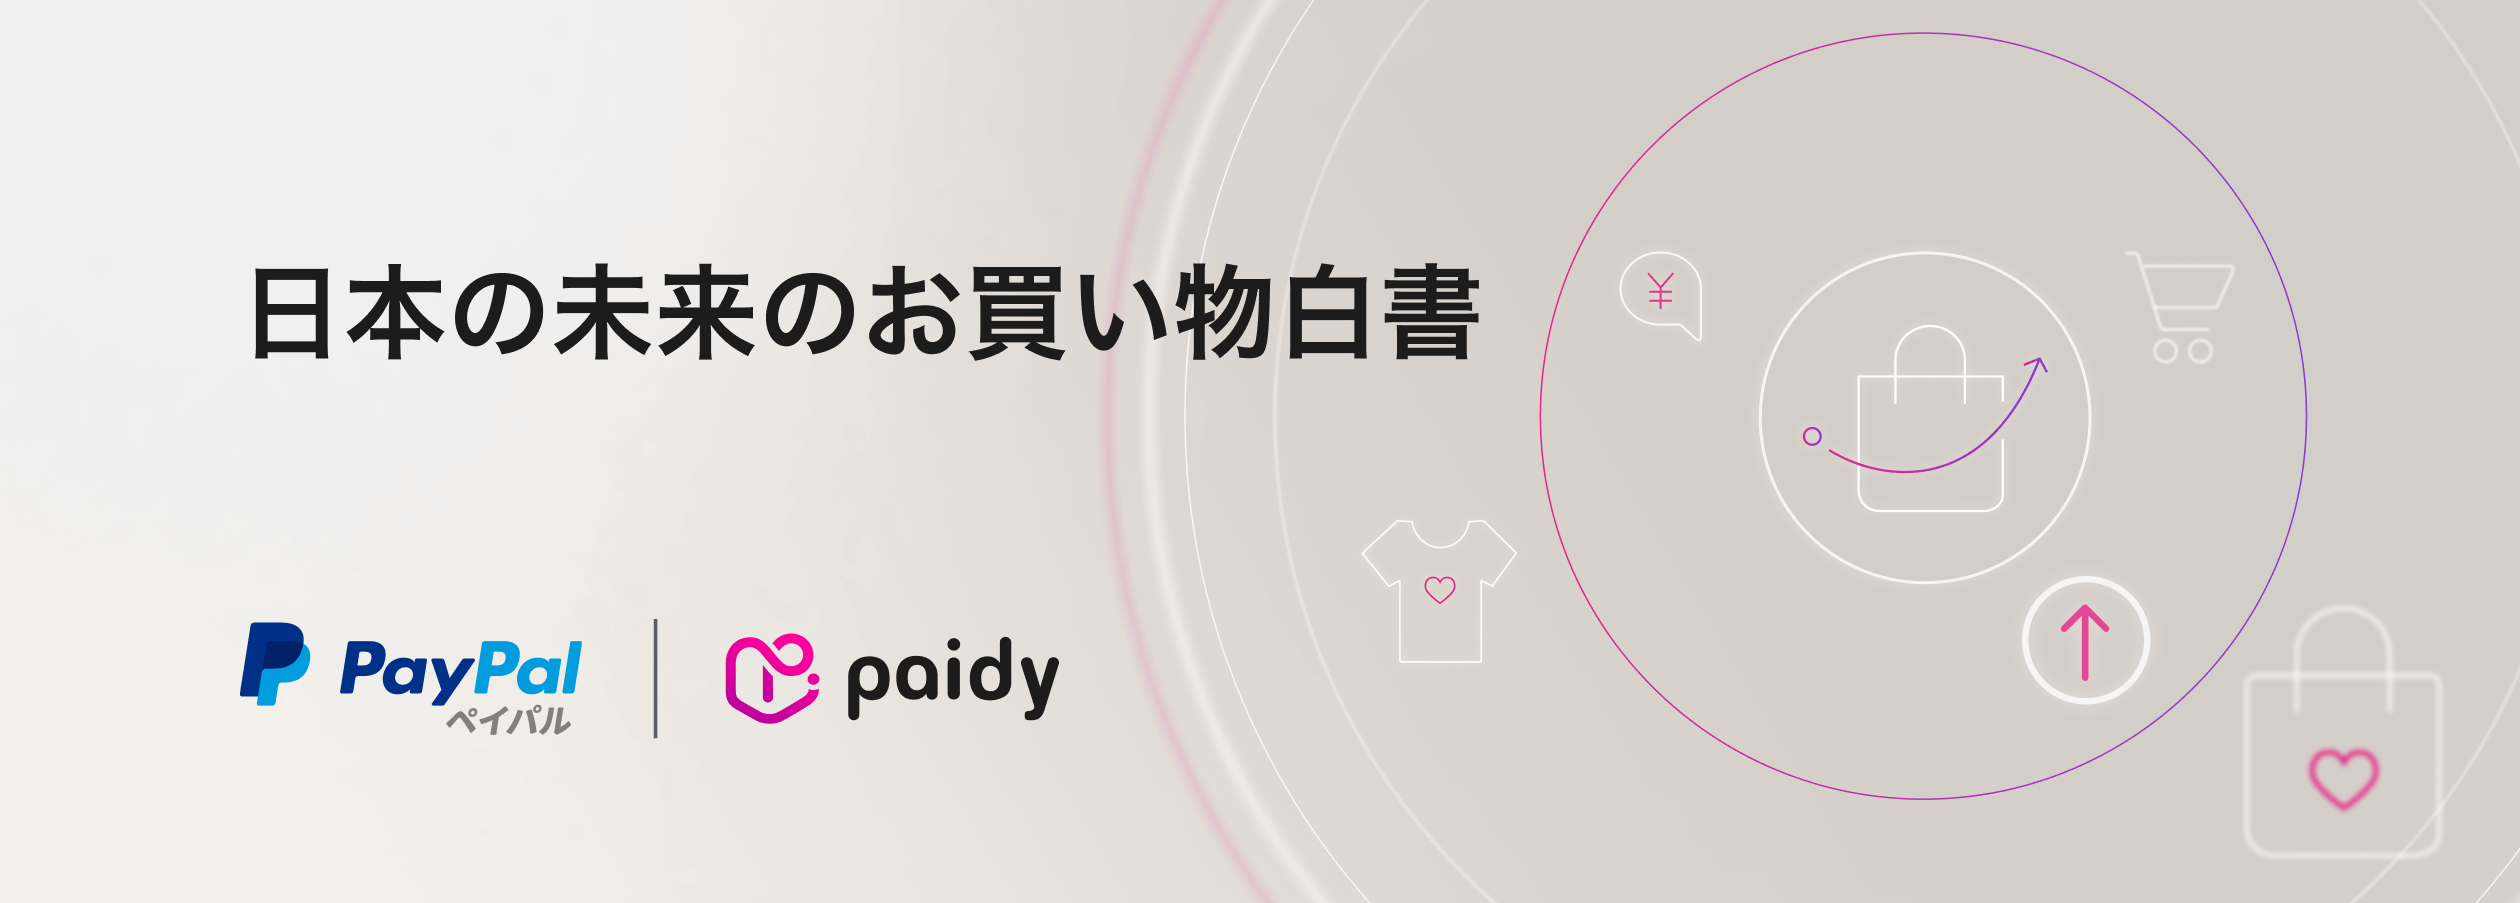 PayPal Paidy 1